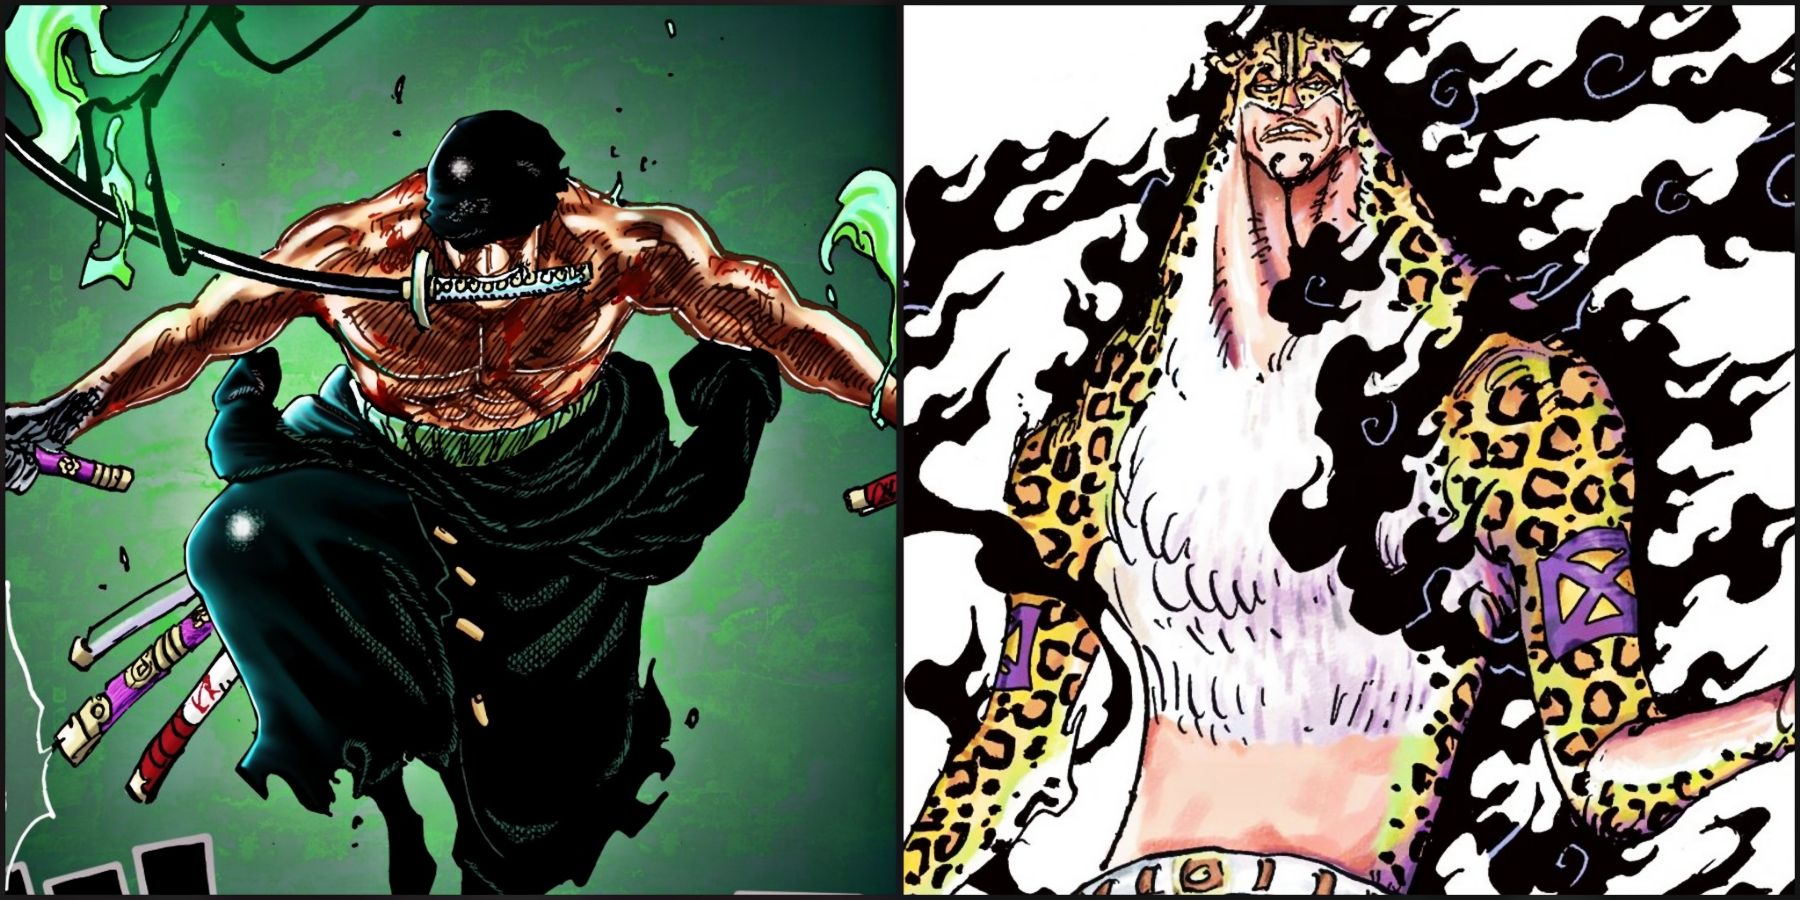 7 One Piece characters that could fight Rob Lucci in the Egghead arc